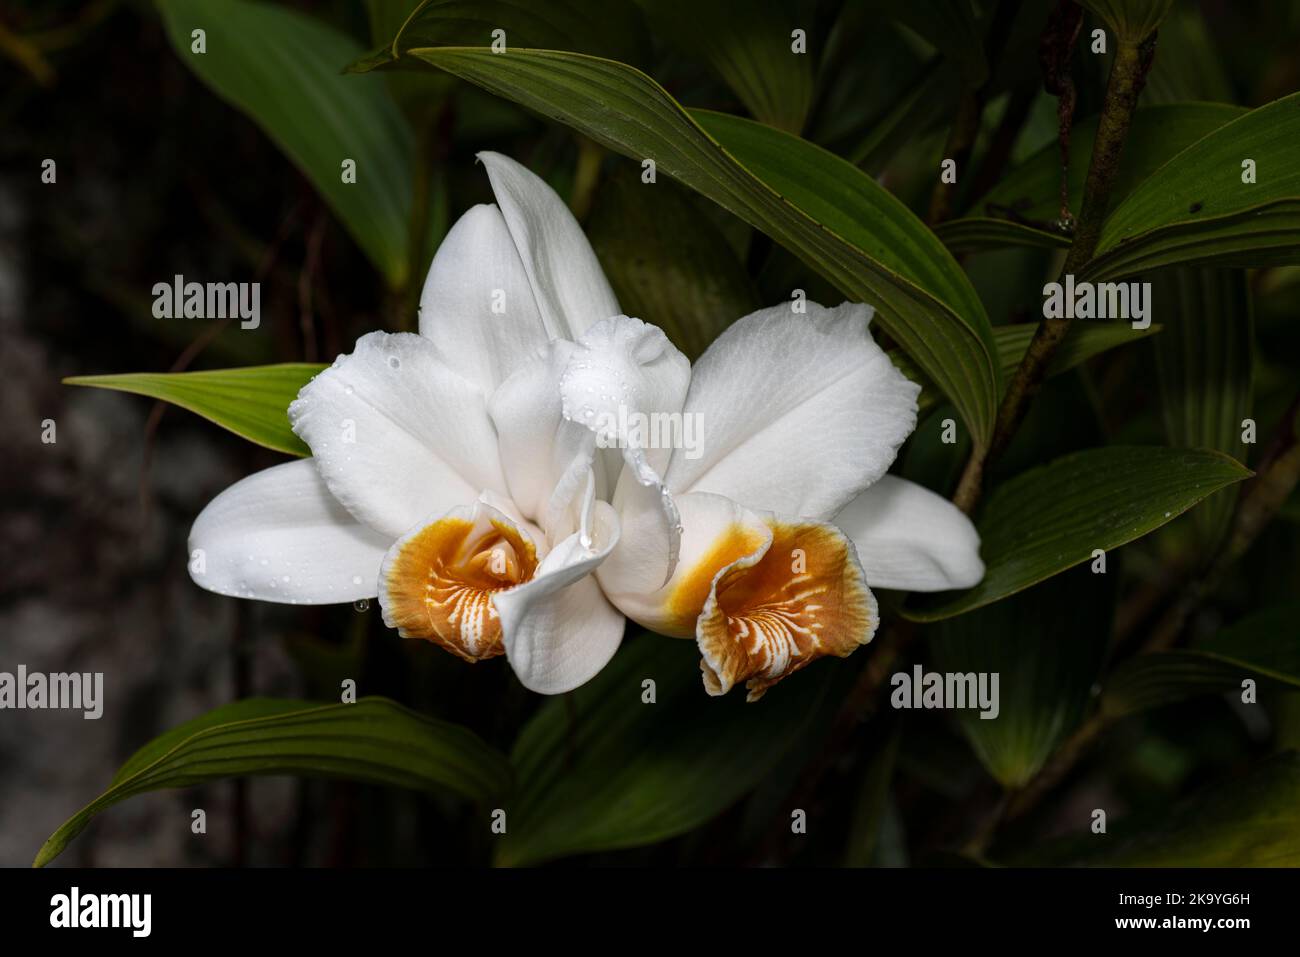 2 white sobralia orchids with flowerrs in full bloom images taken in Panamas cloud forest Stock Photo